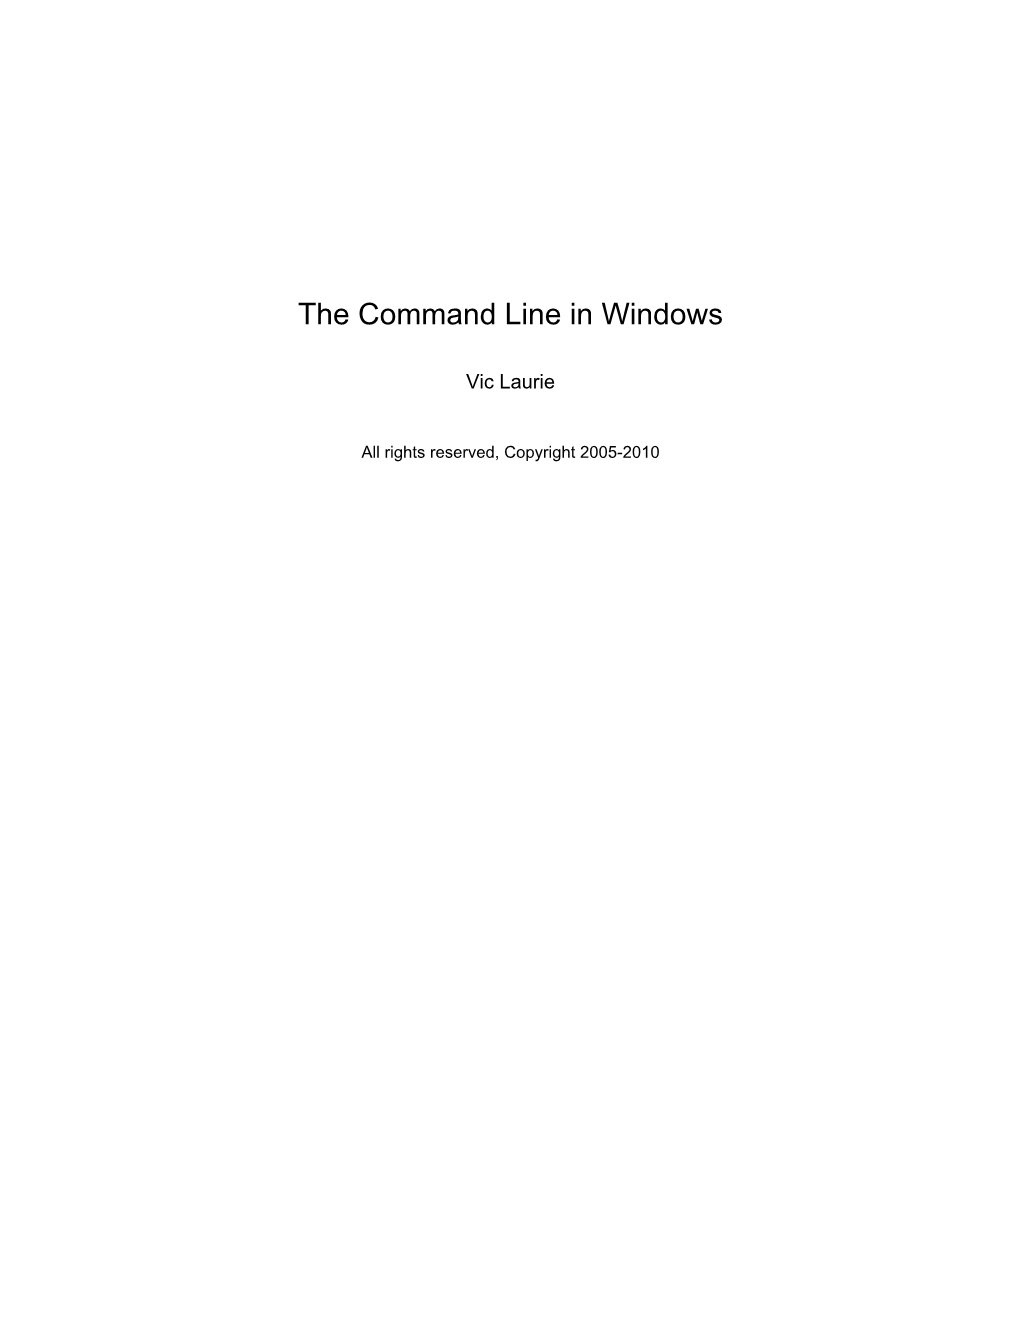 The Windows Command Line, Batch Files, and Scripting- Using the Command Shell